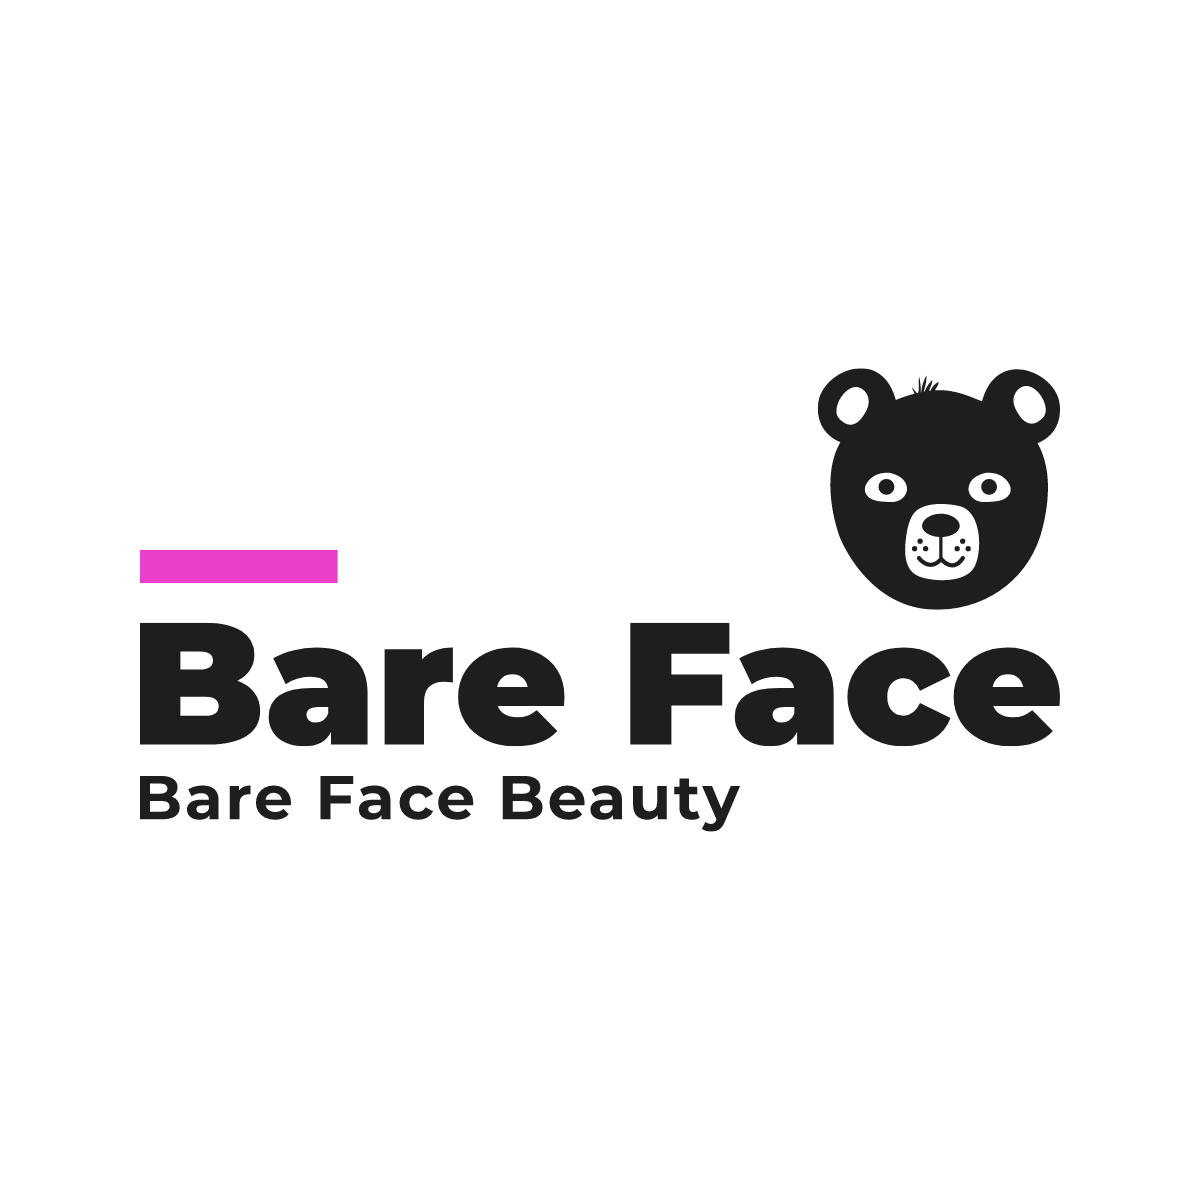 Bare Face: Beauty and Fashion